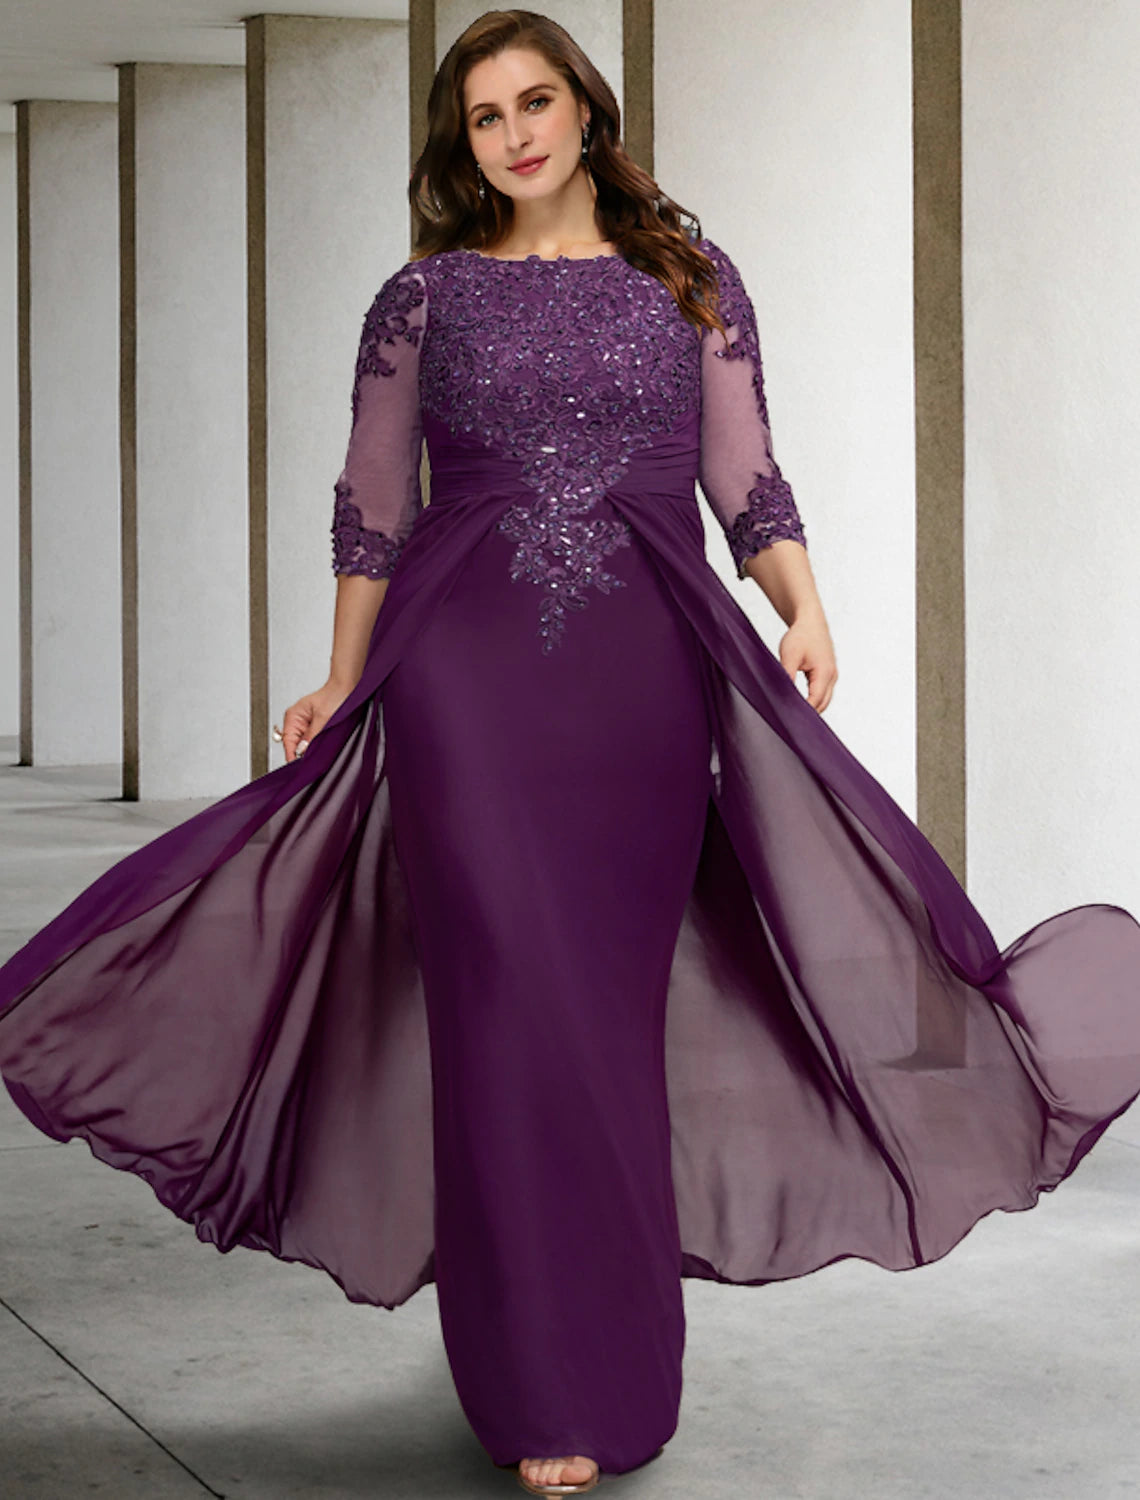 Sheath / Column Plus Size Curve Mother of the Bride Dresses Luxurious Dress Formal Floor Length Half Sleeve Jewel Neck Chiffon with Ruched Beading Appliques